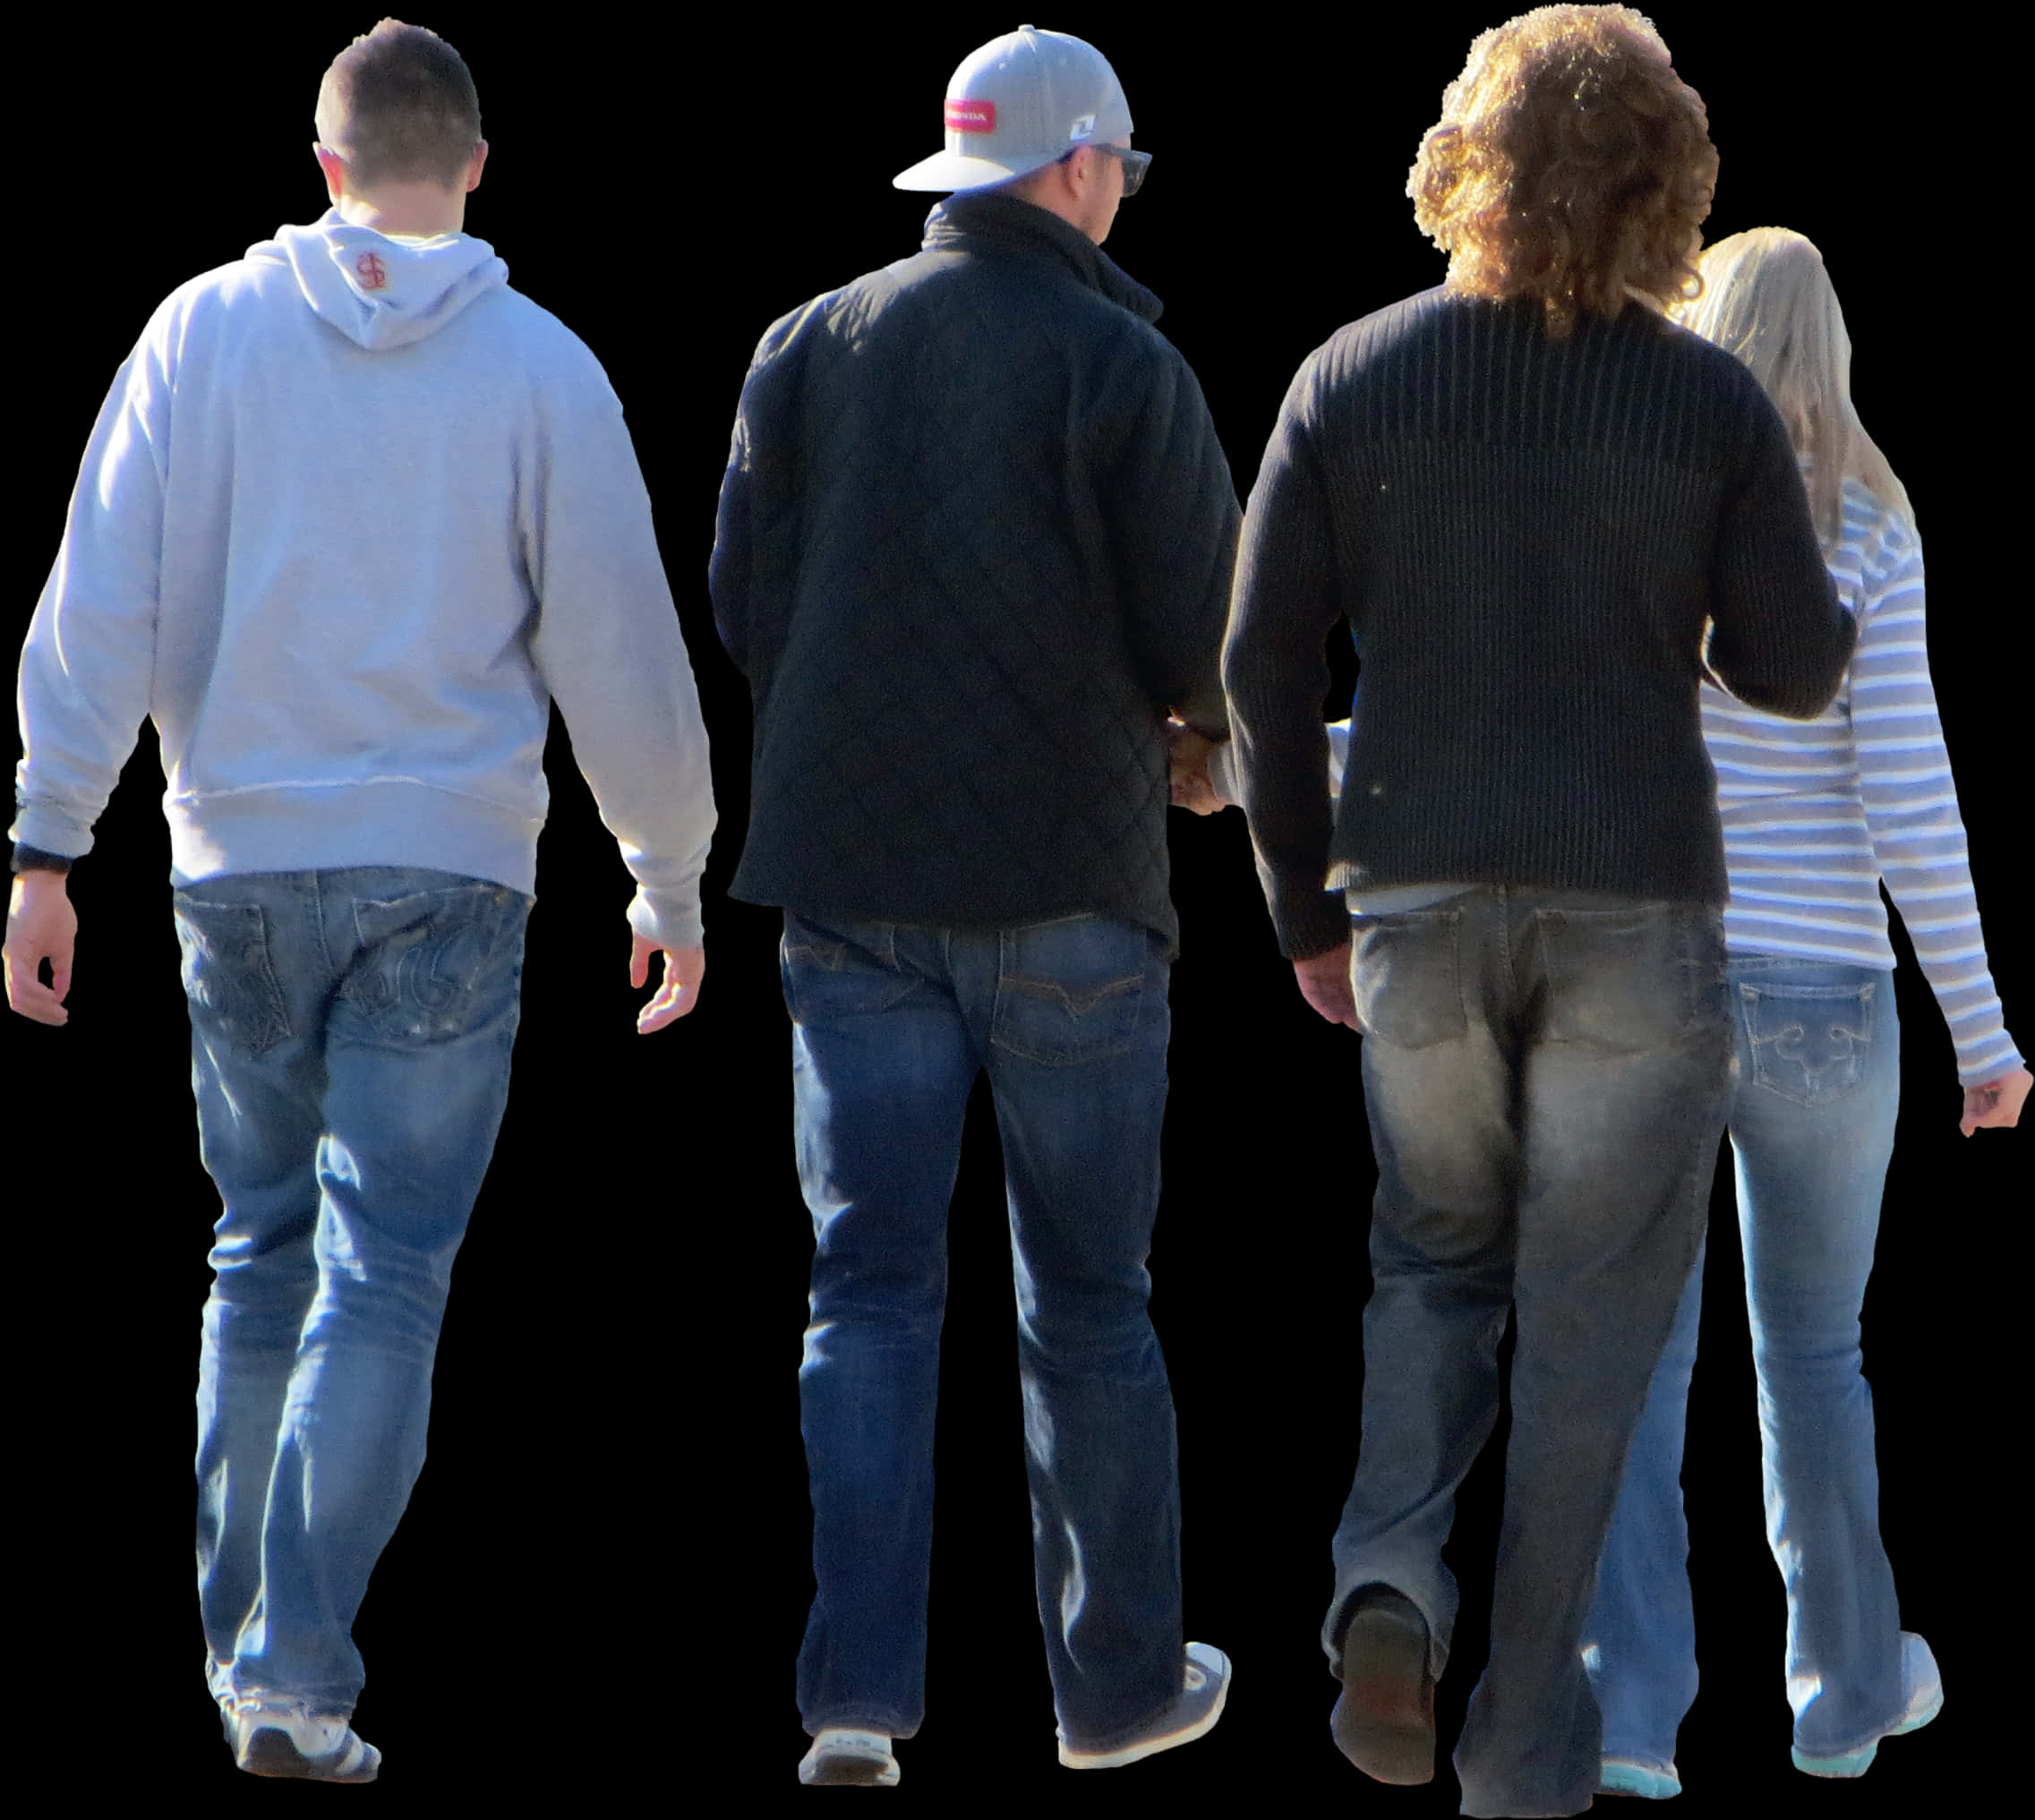 A Group Of People Walking